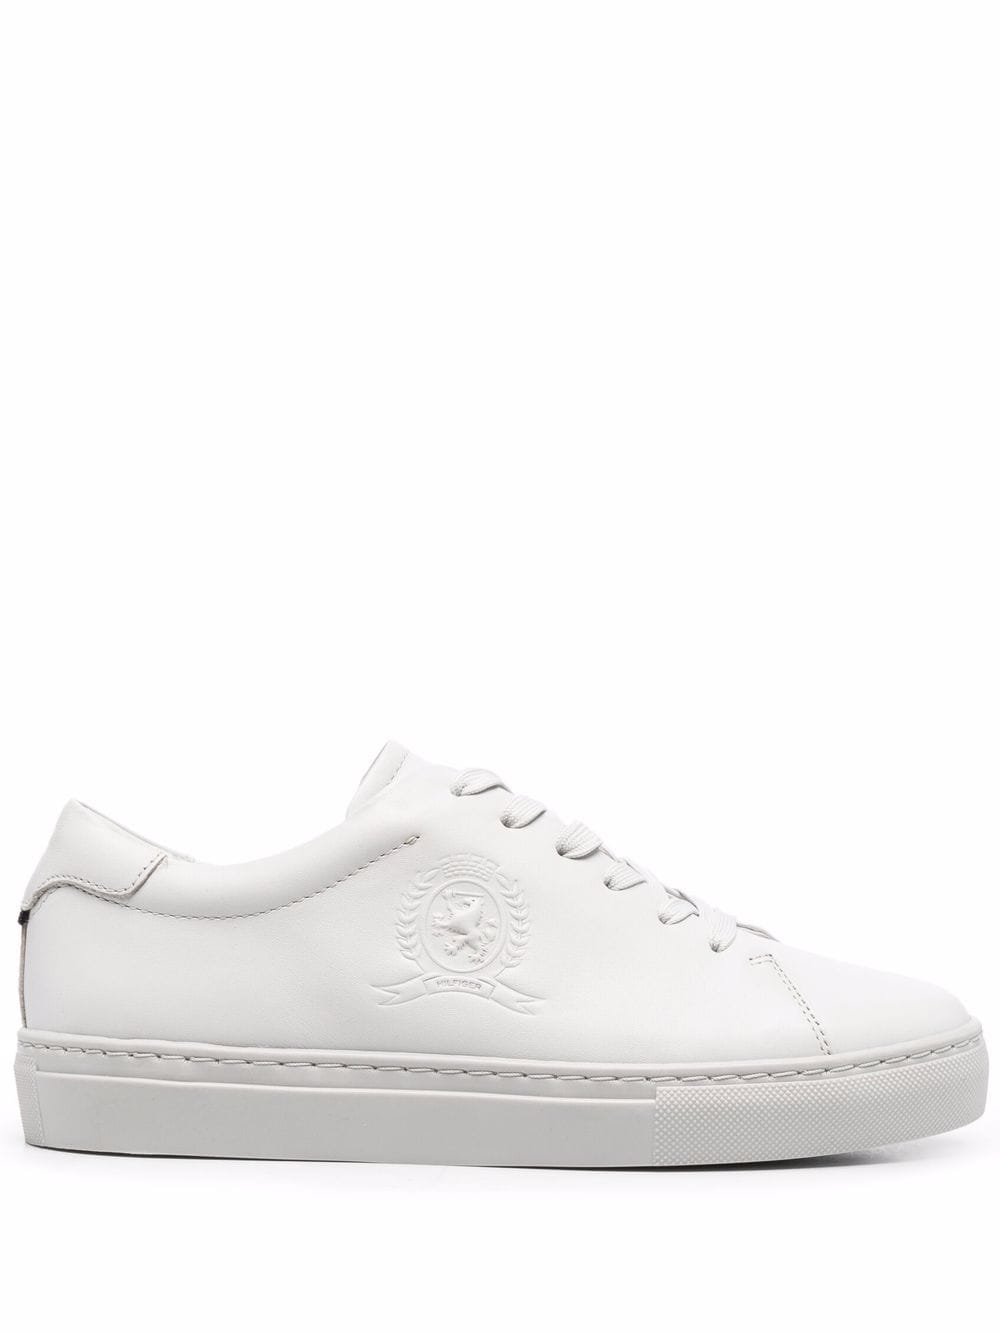 Elevated Crest low-top sneakers